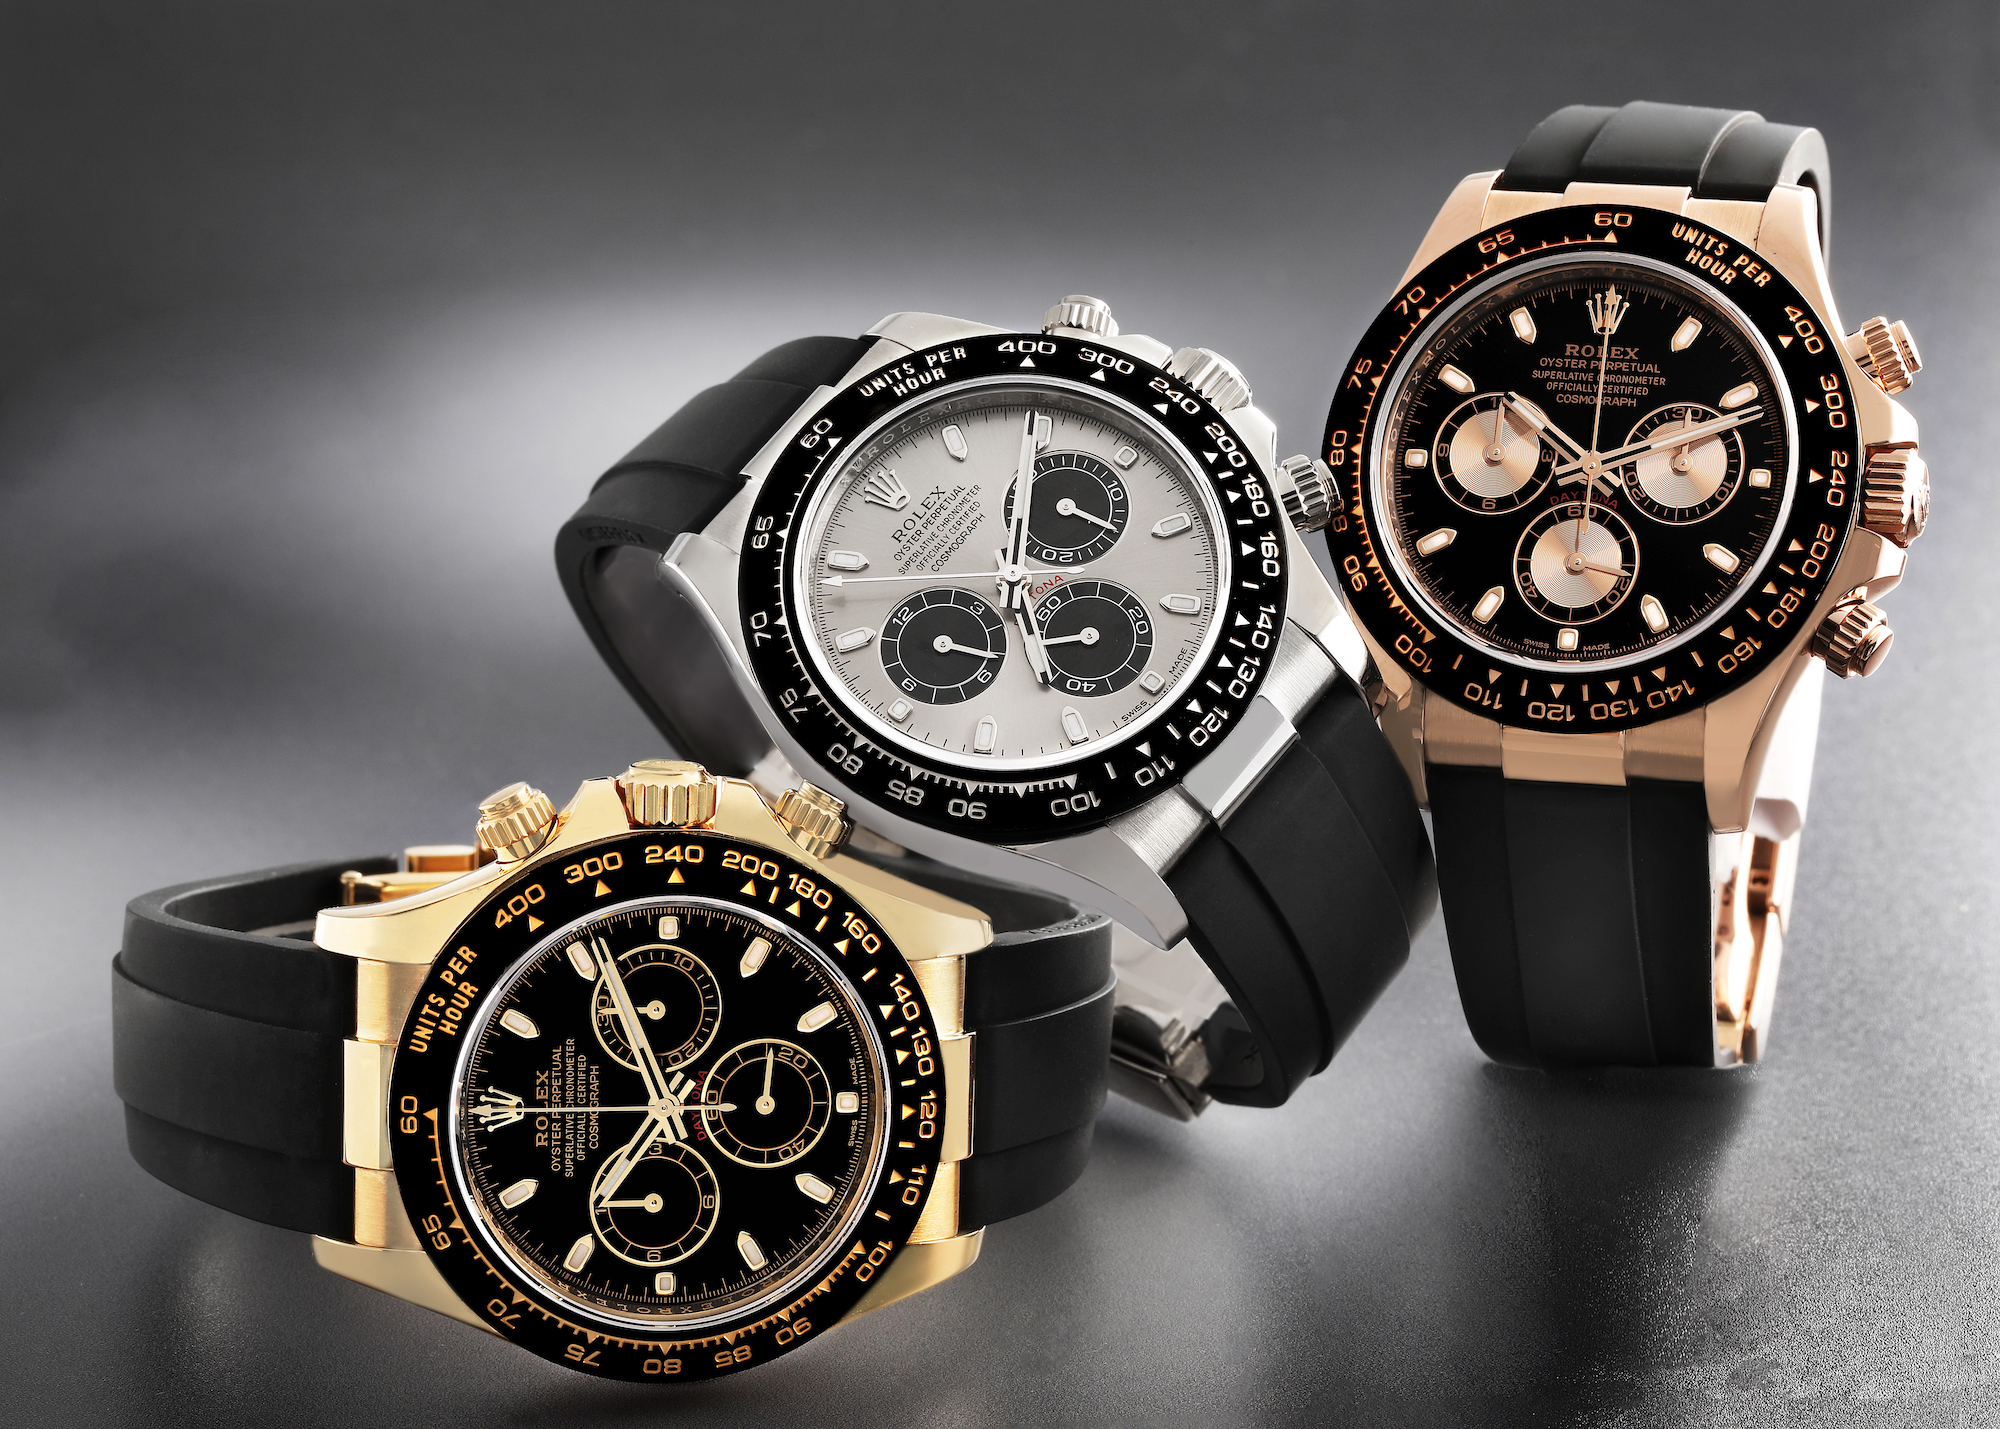 Rolex Daytona Yellow Gold, White Gold and Everose Gold Oysterflex Watches